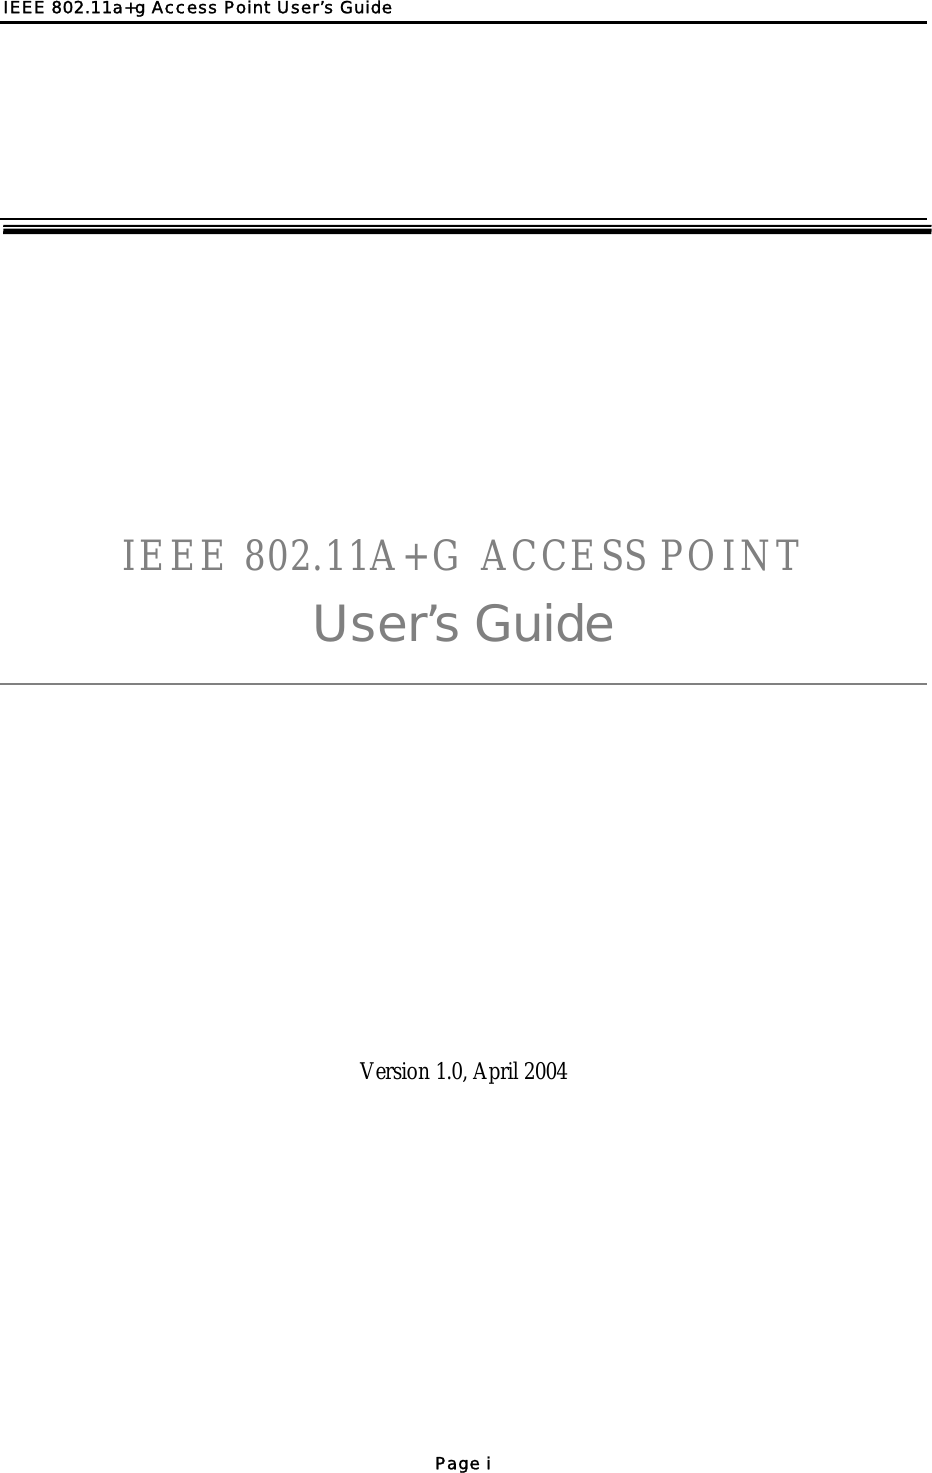 IEEE 802.11a+g Access Point User’s Guide    IEEE 802.11A+G ACCESS POINT User’s Guide Version 1.0, April 2004 Page i  